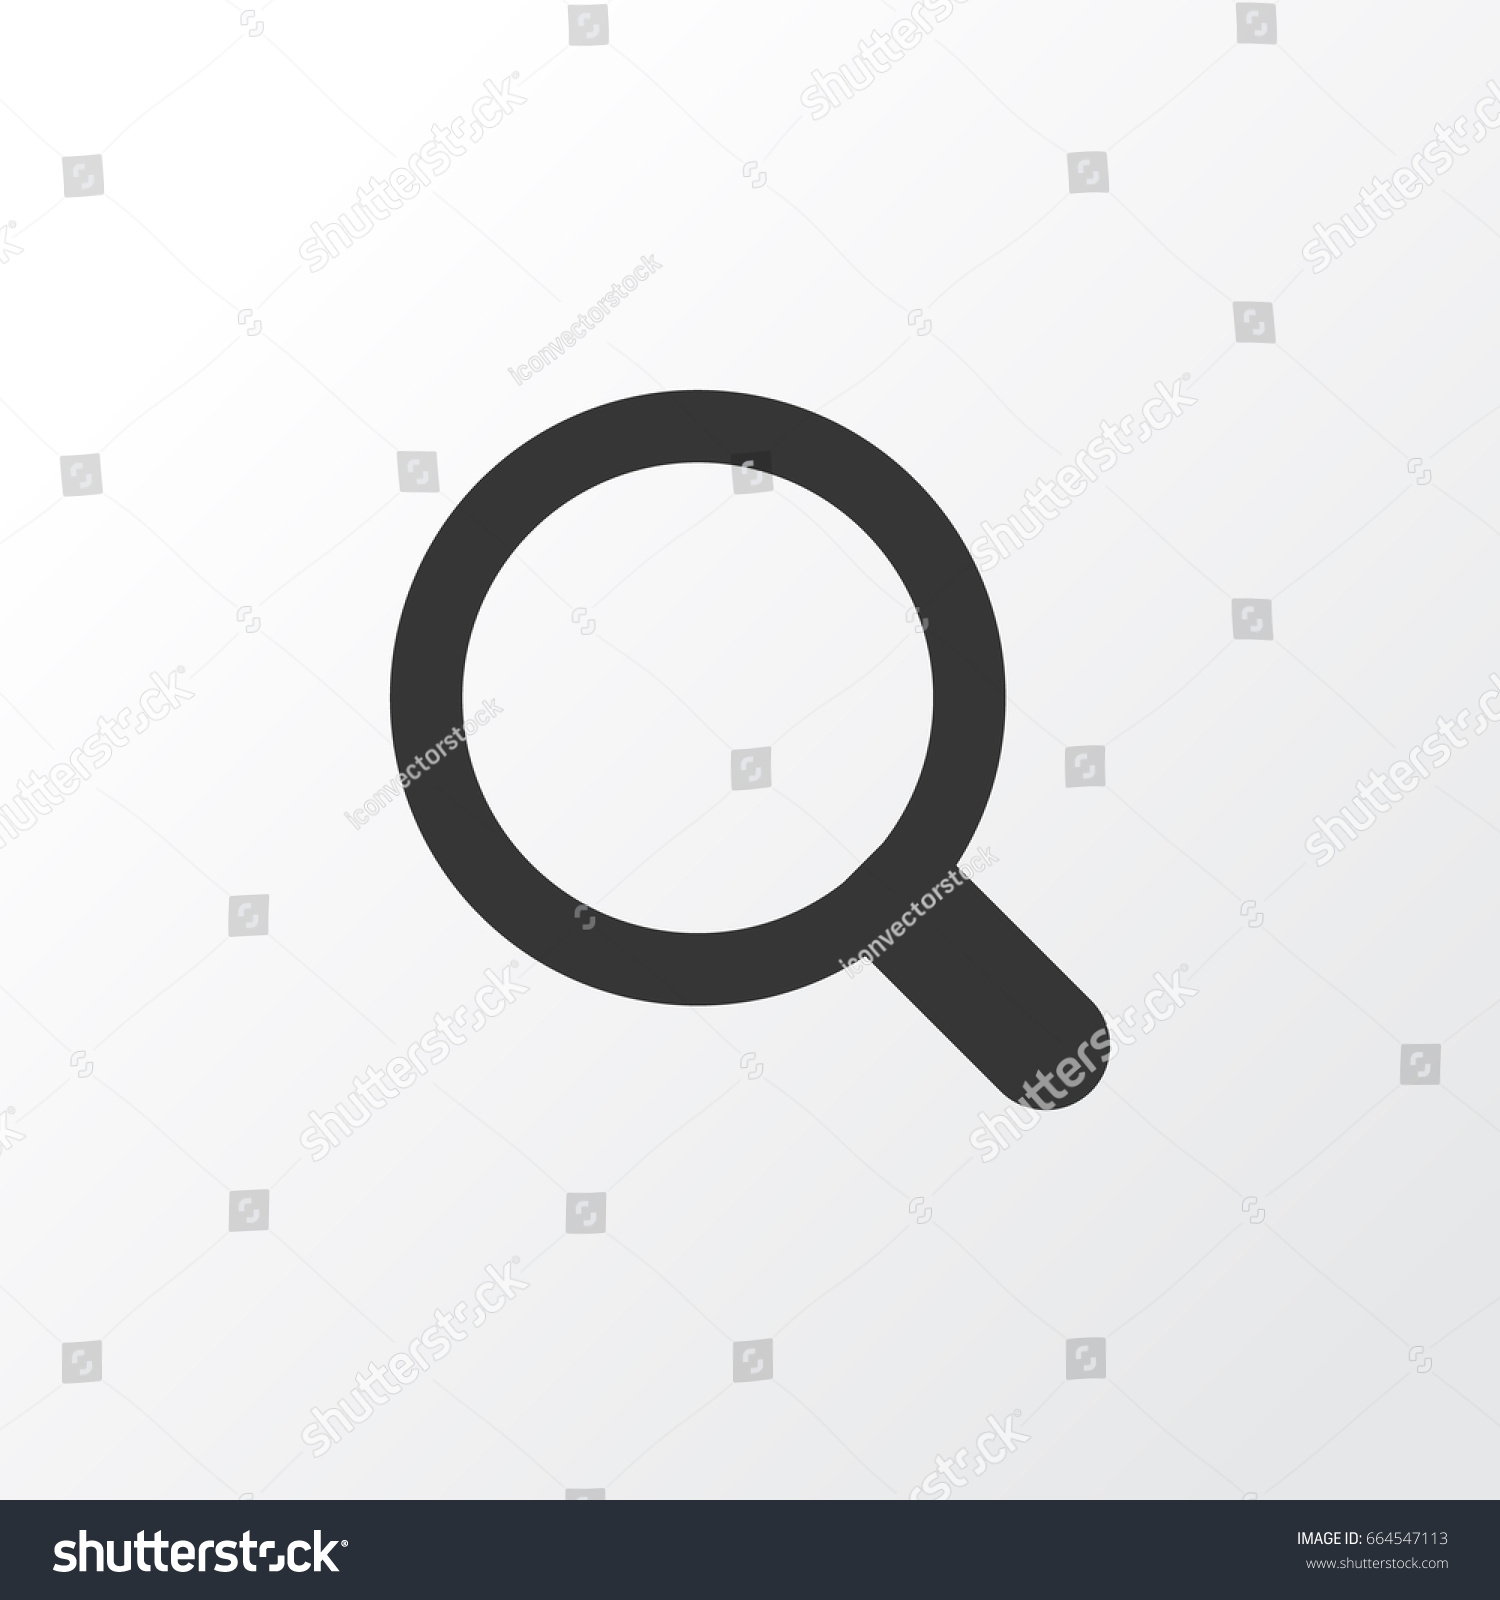 Search Icon Symbol. Premium Quality Isolated Magnifier Element In Trendy Style. Premium search icon vector illustration.  #664547113